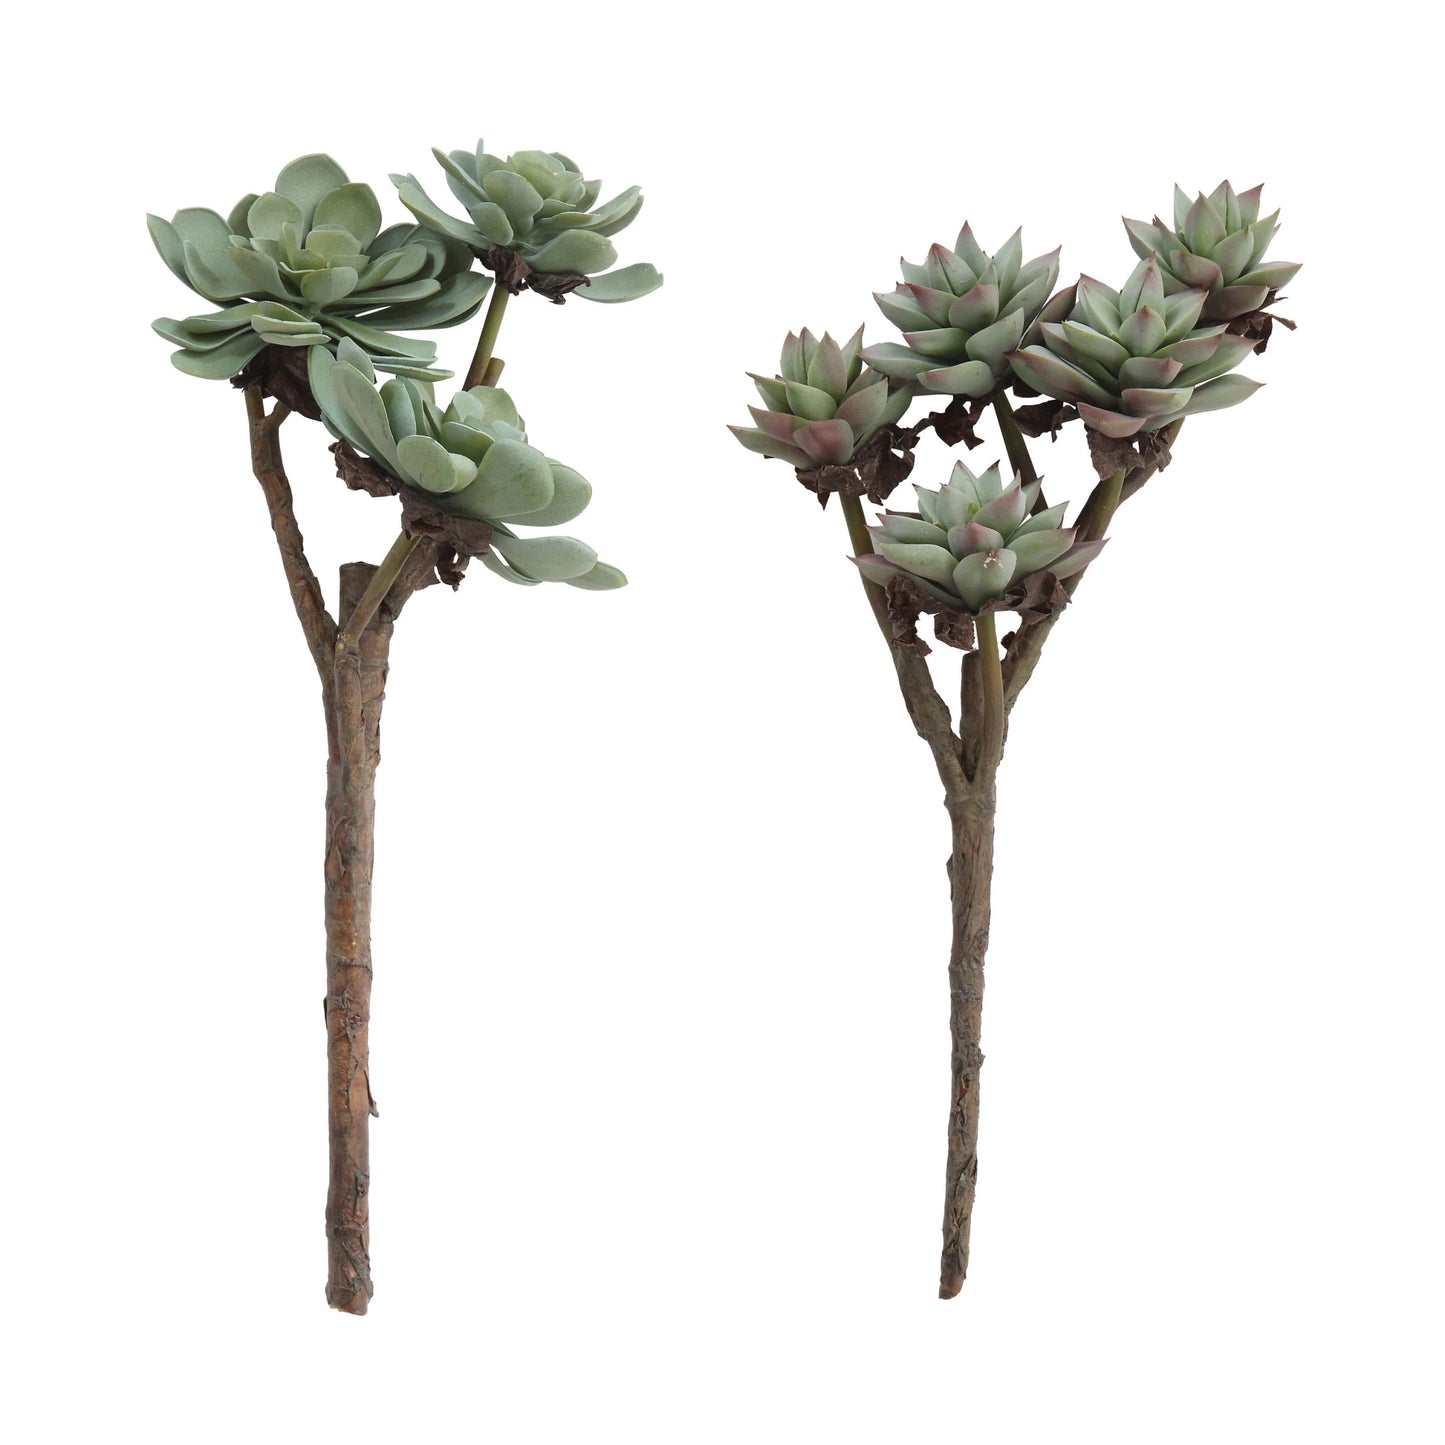 2 styles of succulent stems on a white background.